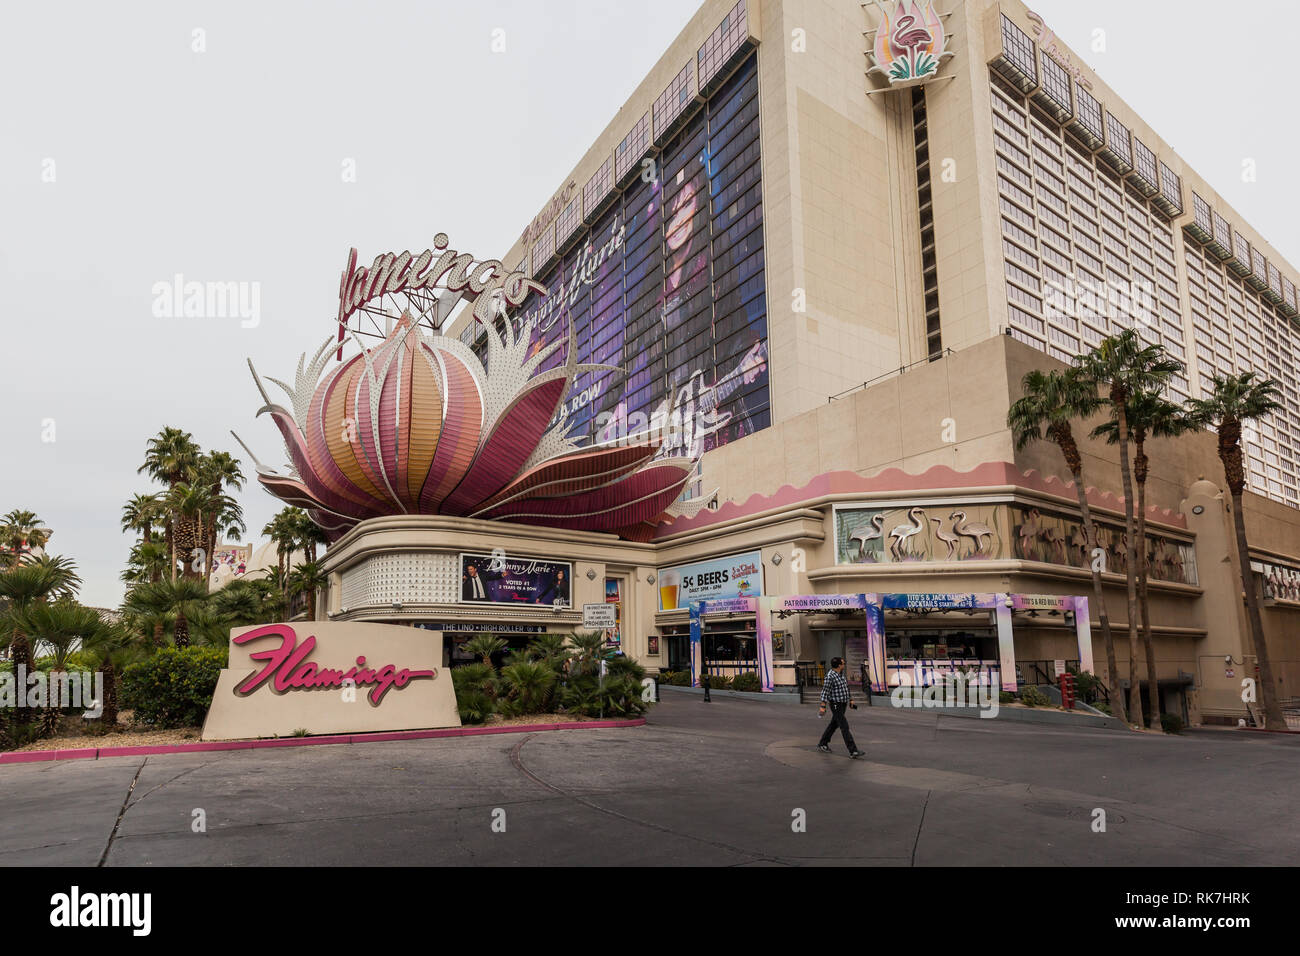 Front Entrance of Flamingo Las Vegas, Flamingo is a hotel and casino located on the Las Vegas Strip in Paradise, Nevada. Stock Photo